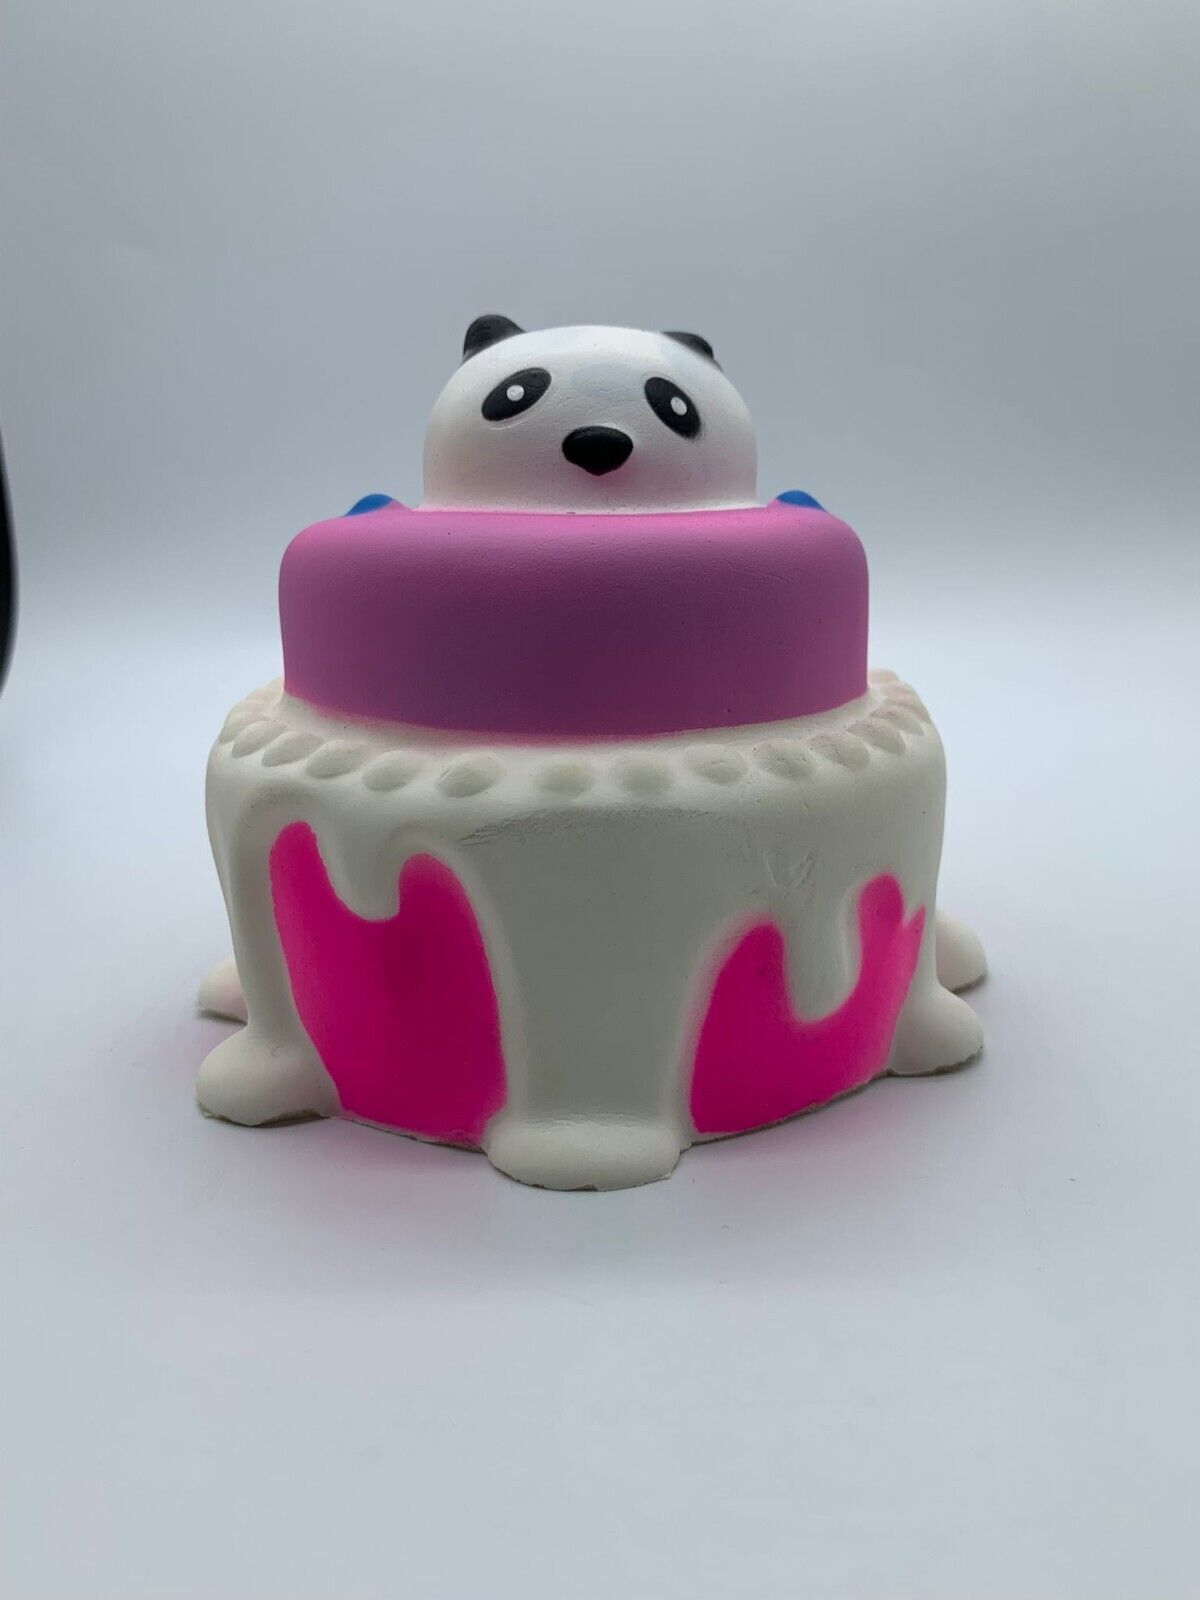 squishy Two-Tiered Cake with Panda home decoration toy slow rising stress relief